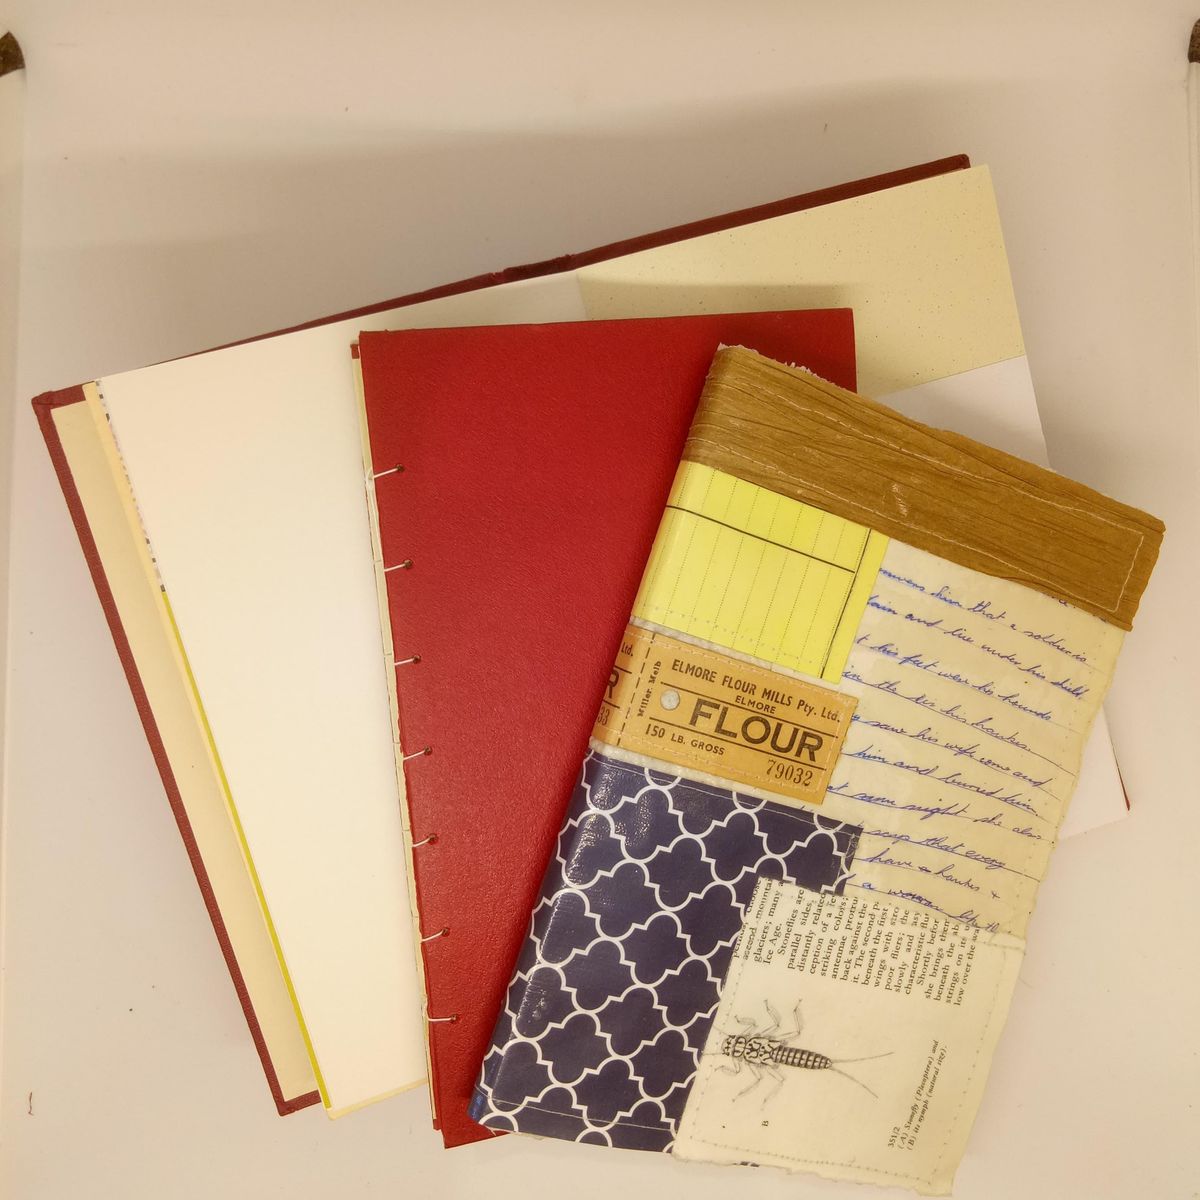 Make book covers : #3 in A Season of Book Making